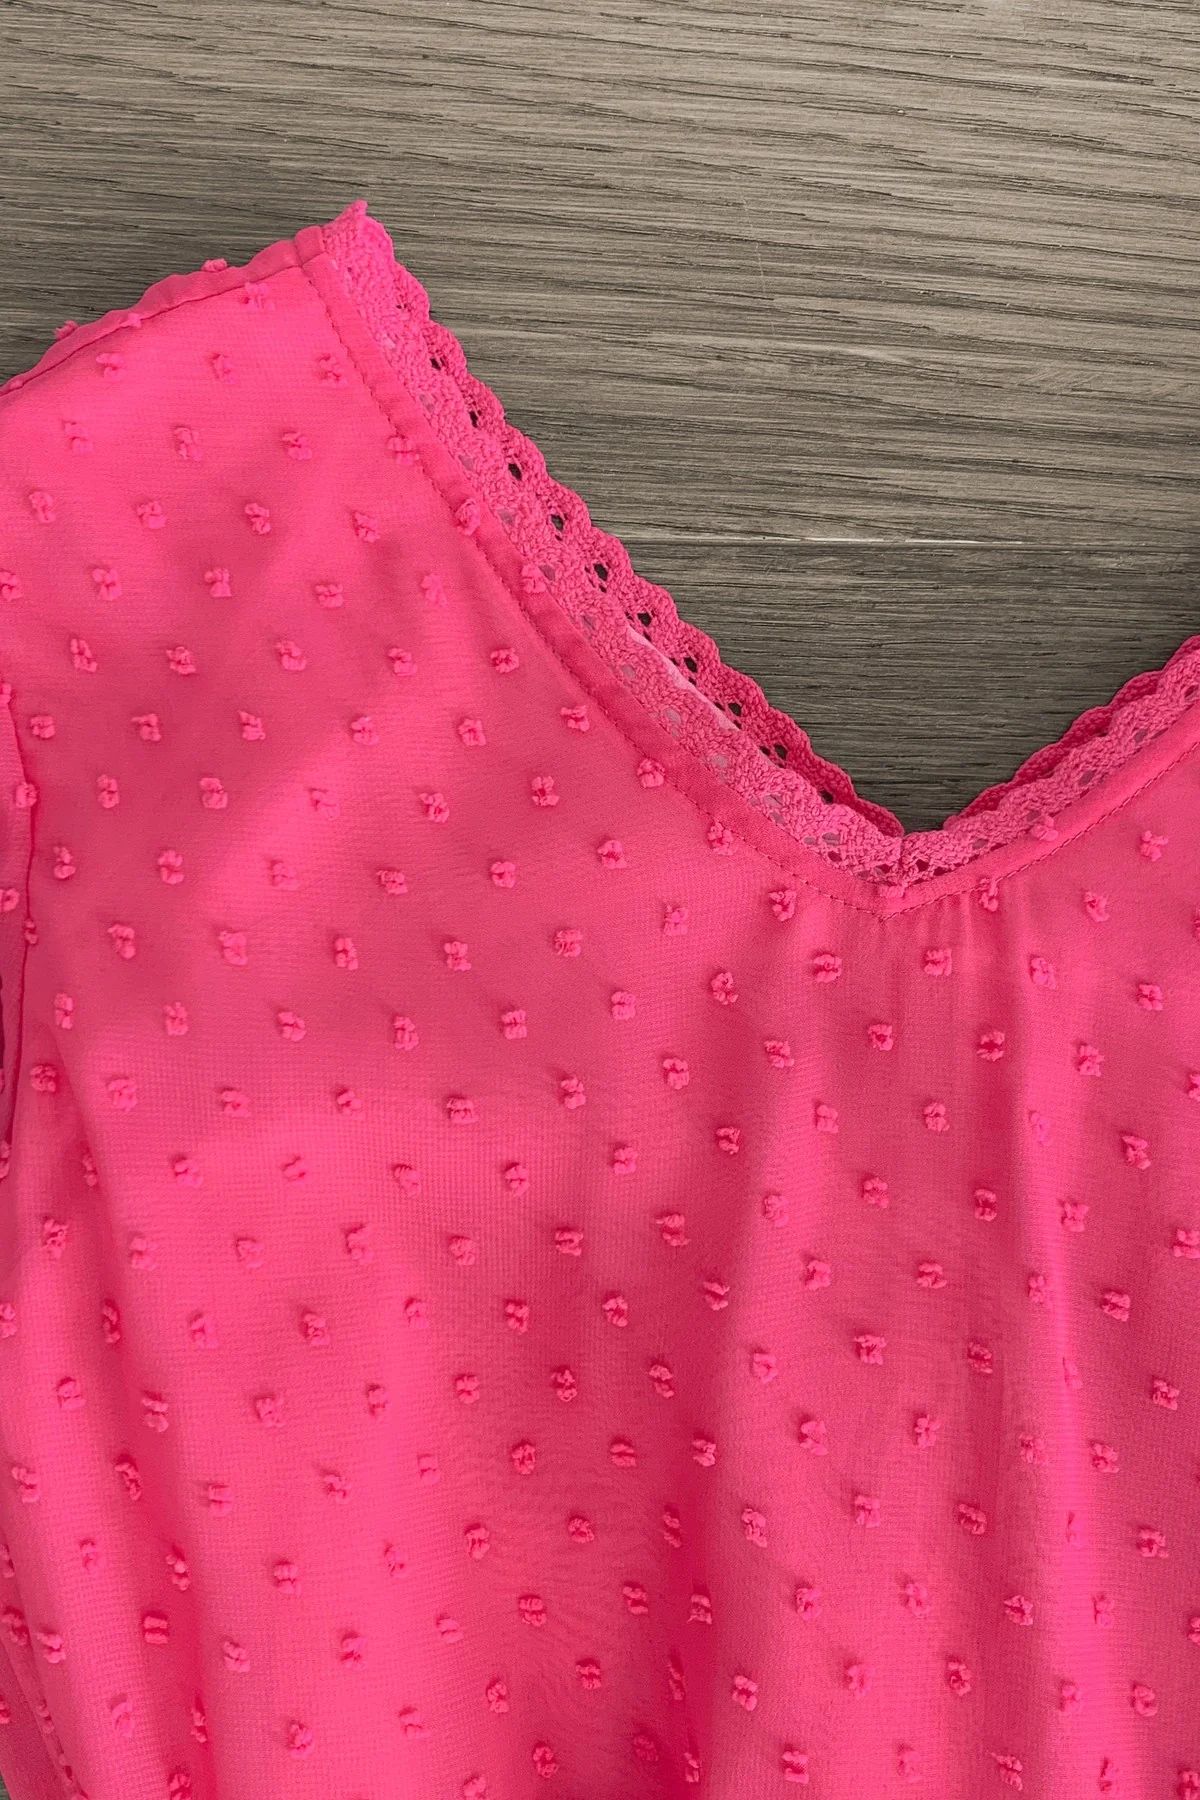 Mom & Me - Hot Pink Swiss Dot Dress | Sparkle In Pink